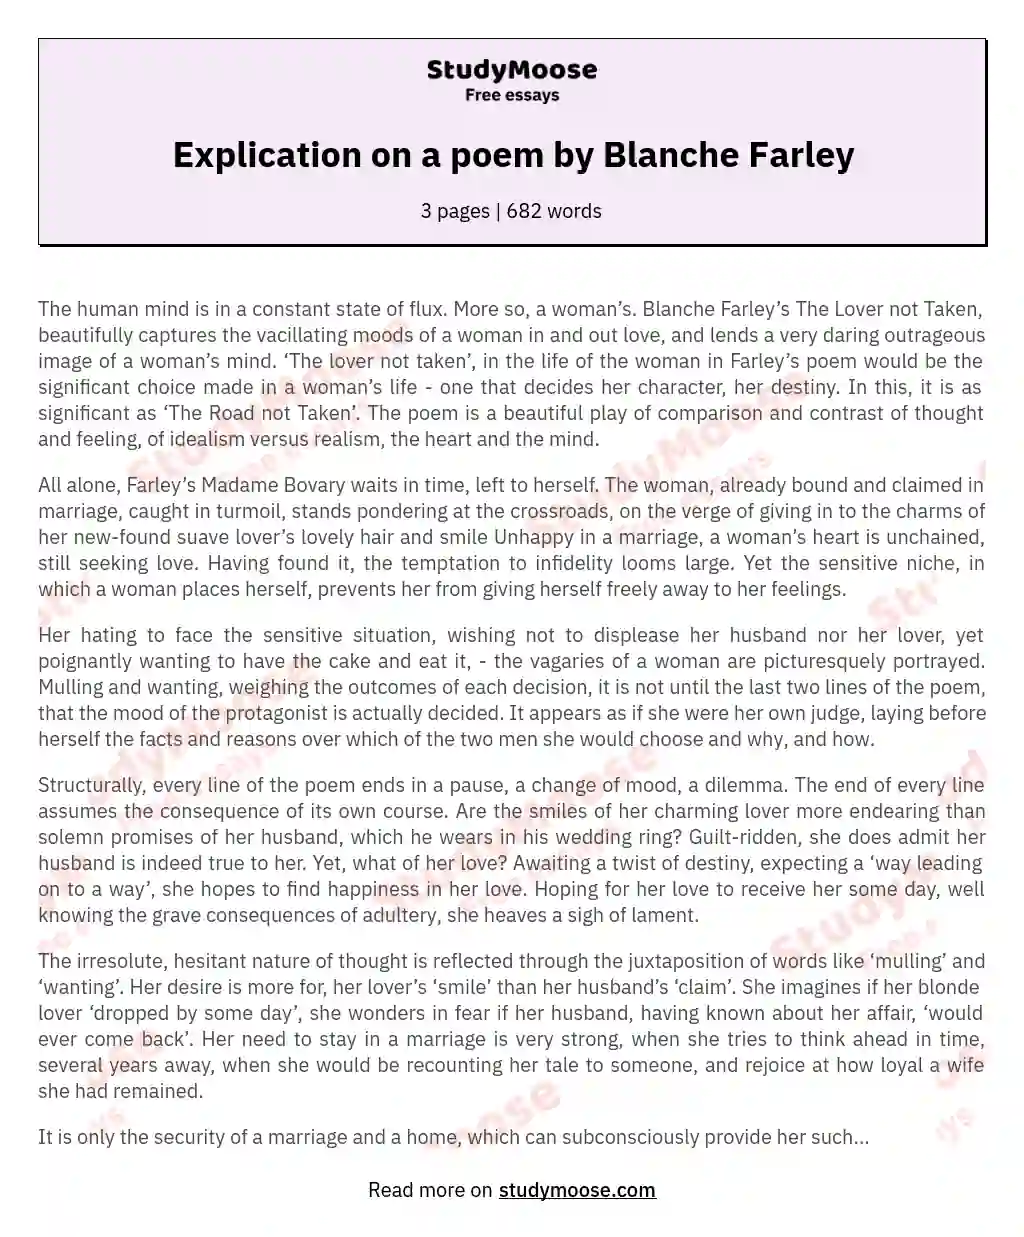 Explication on a poem by Blanche Farley